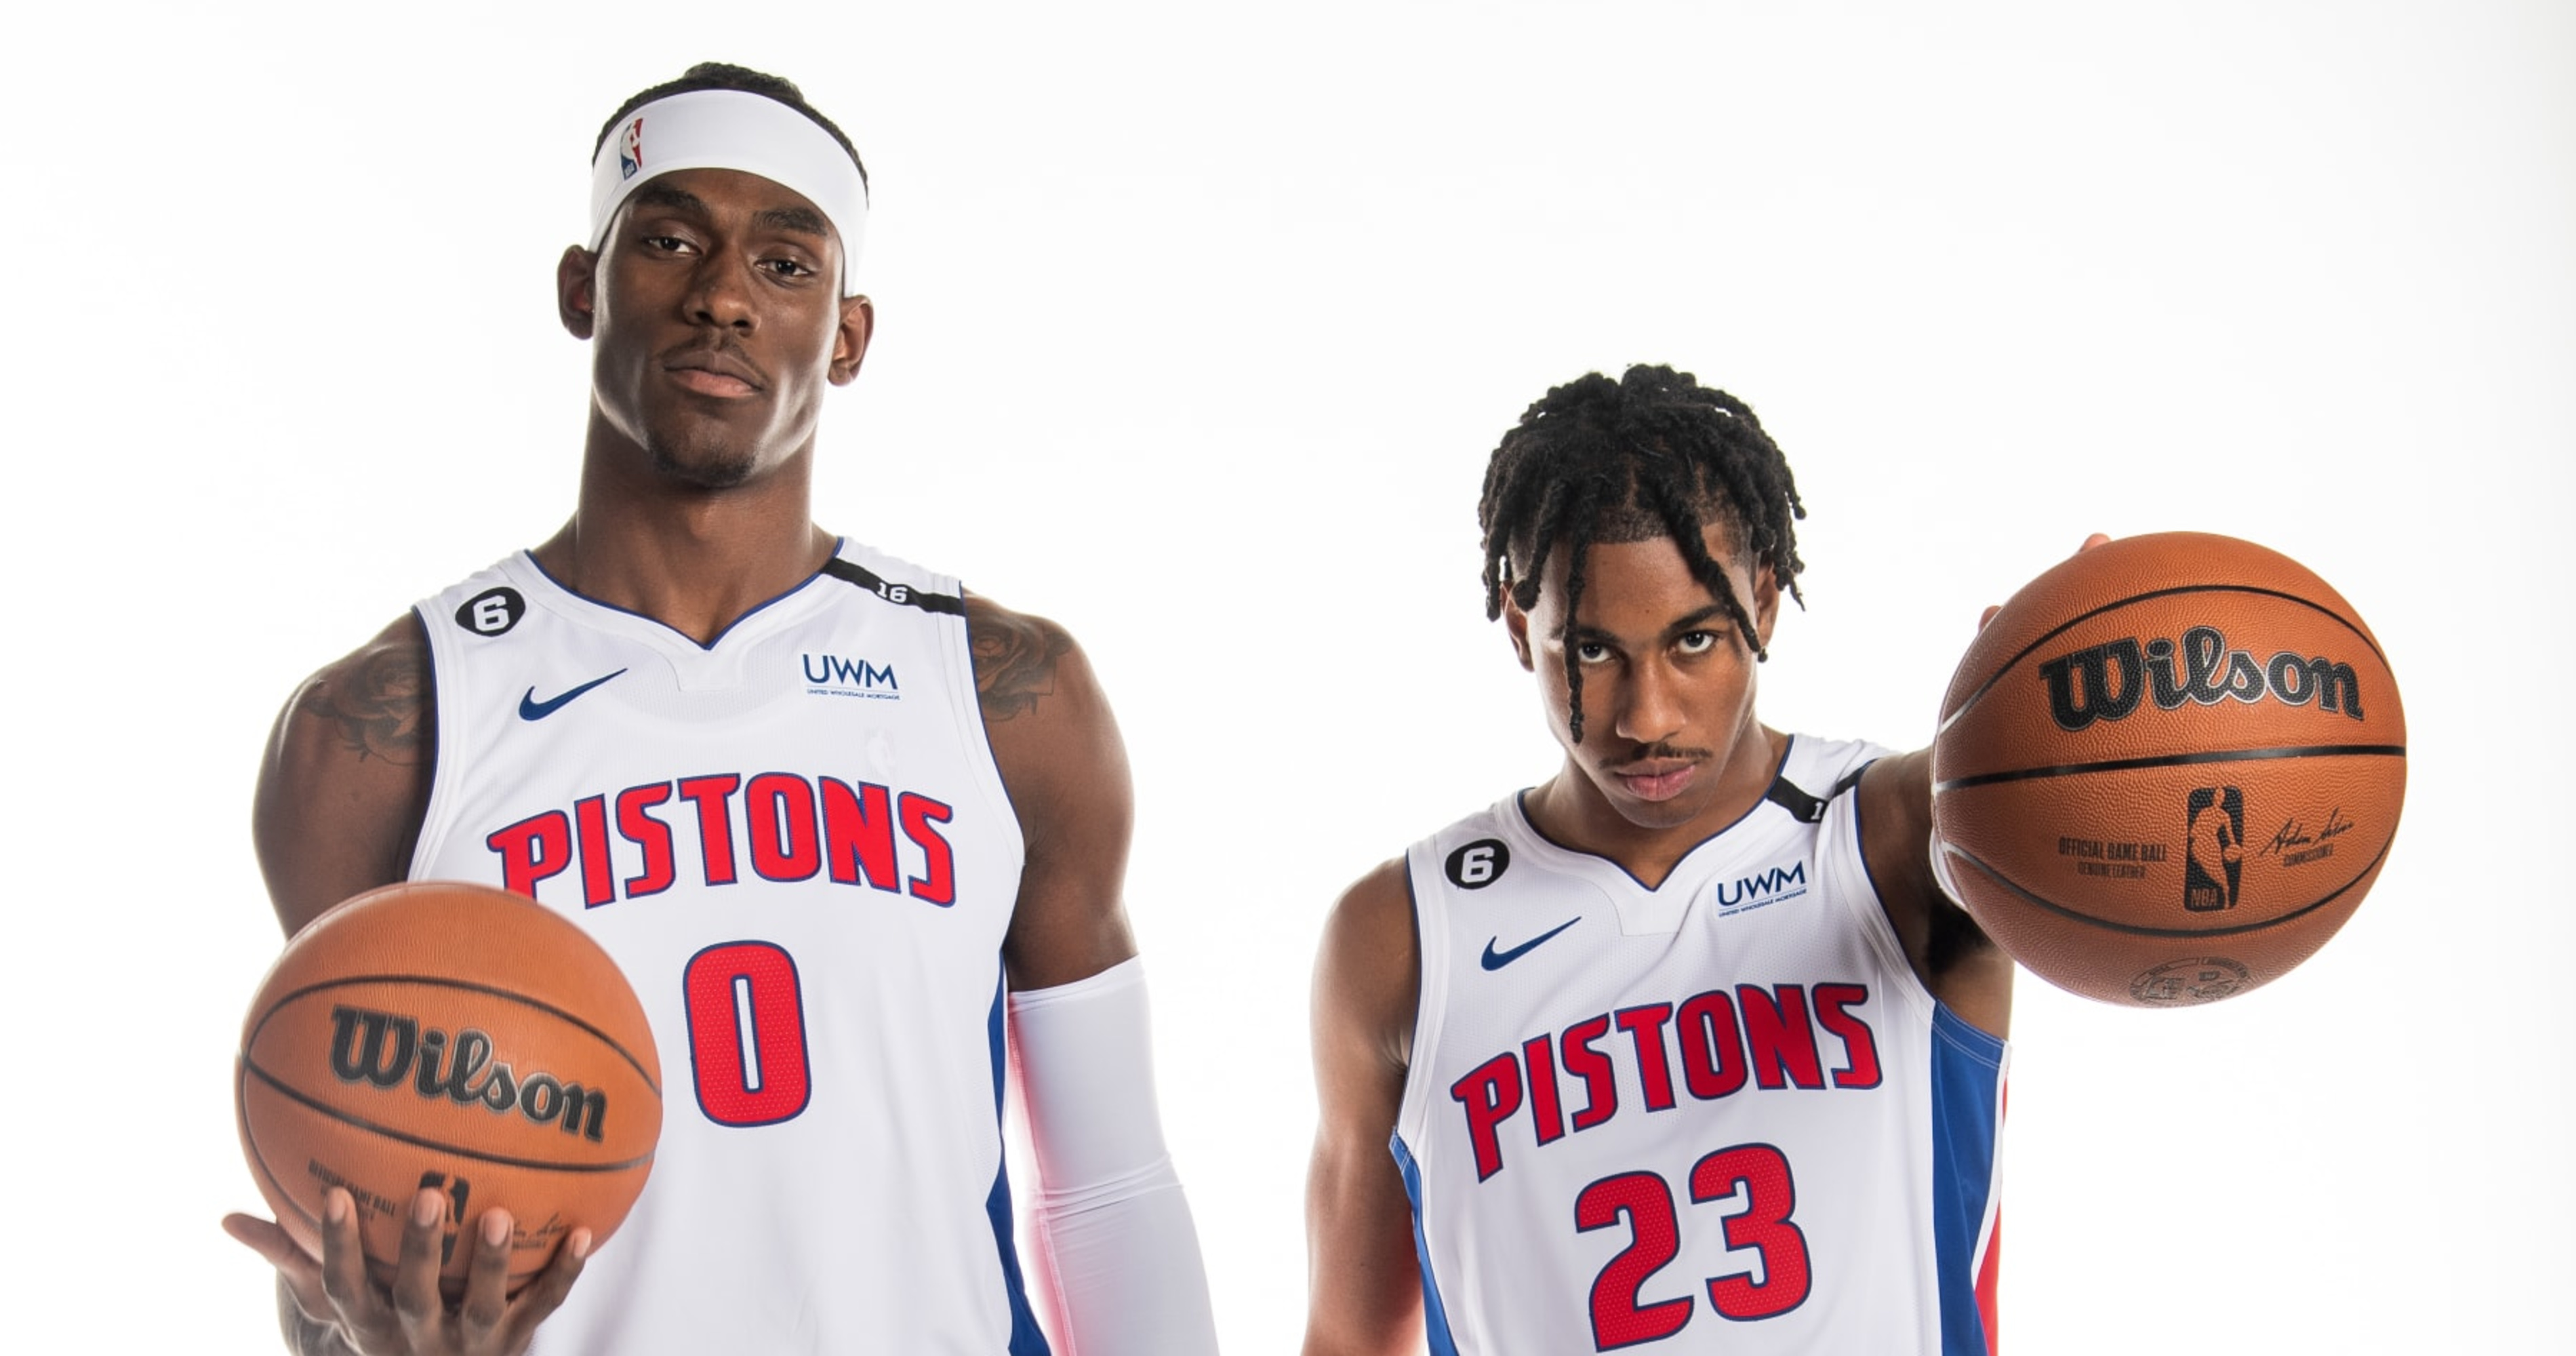 Detroit Pistons Receive First-Ever NBA Team Marketing Campaign of